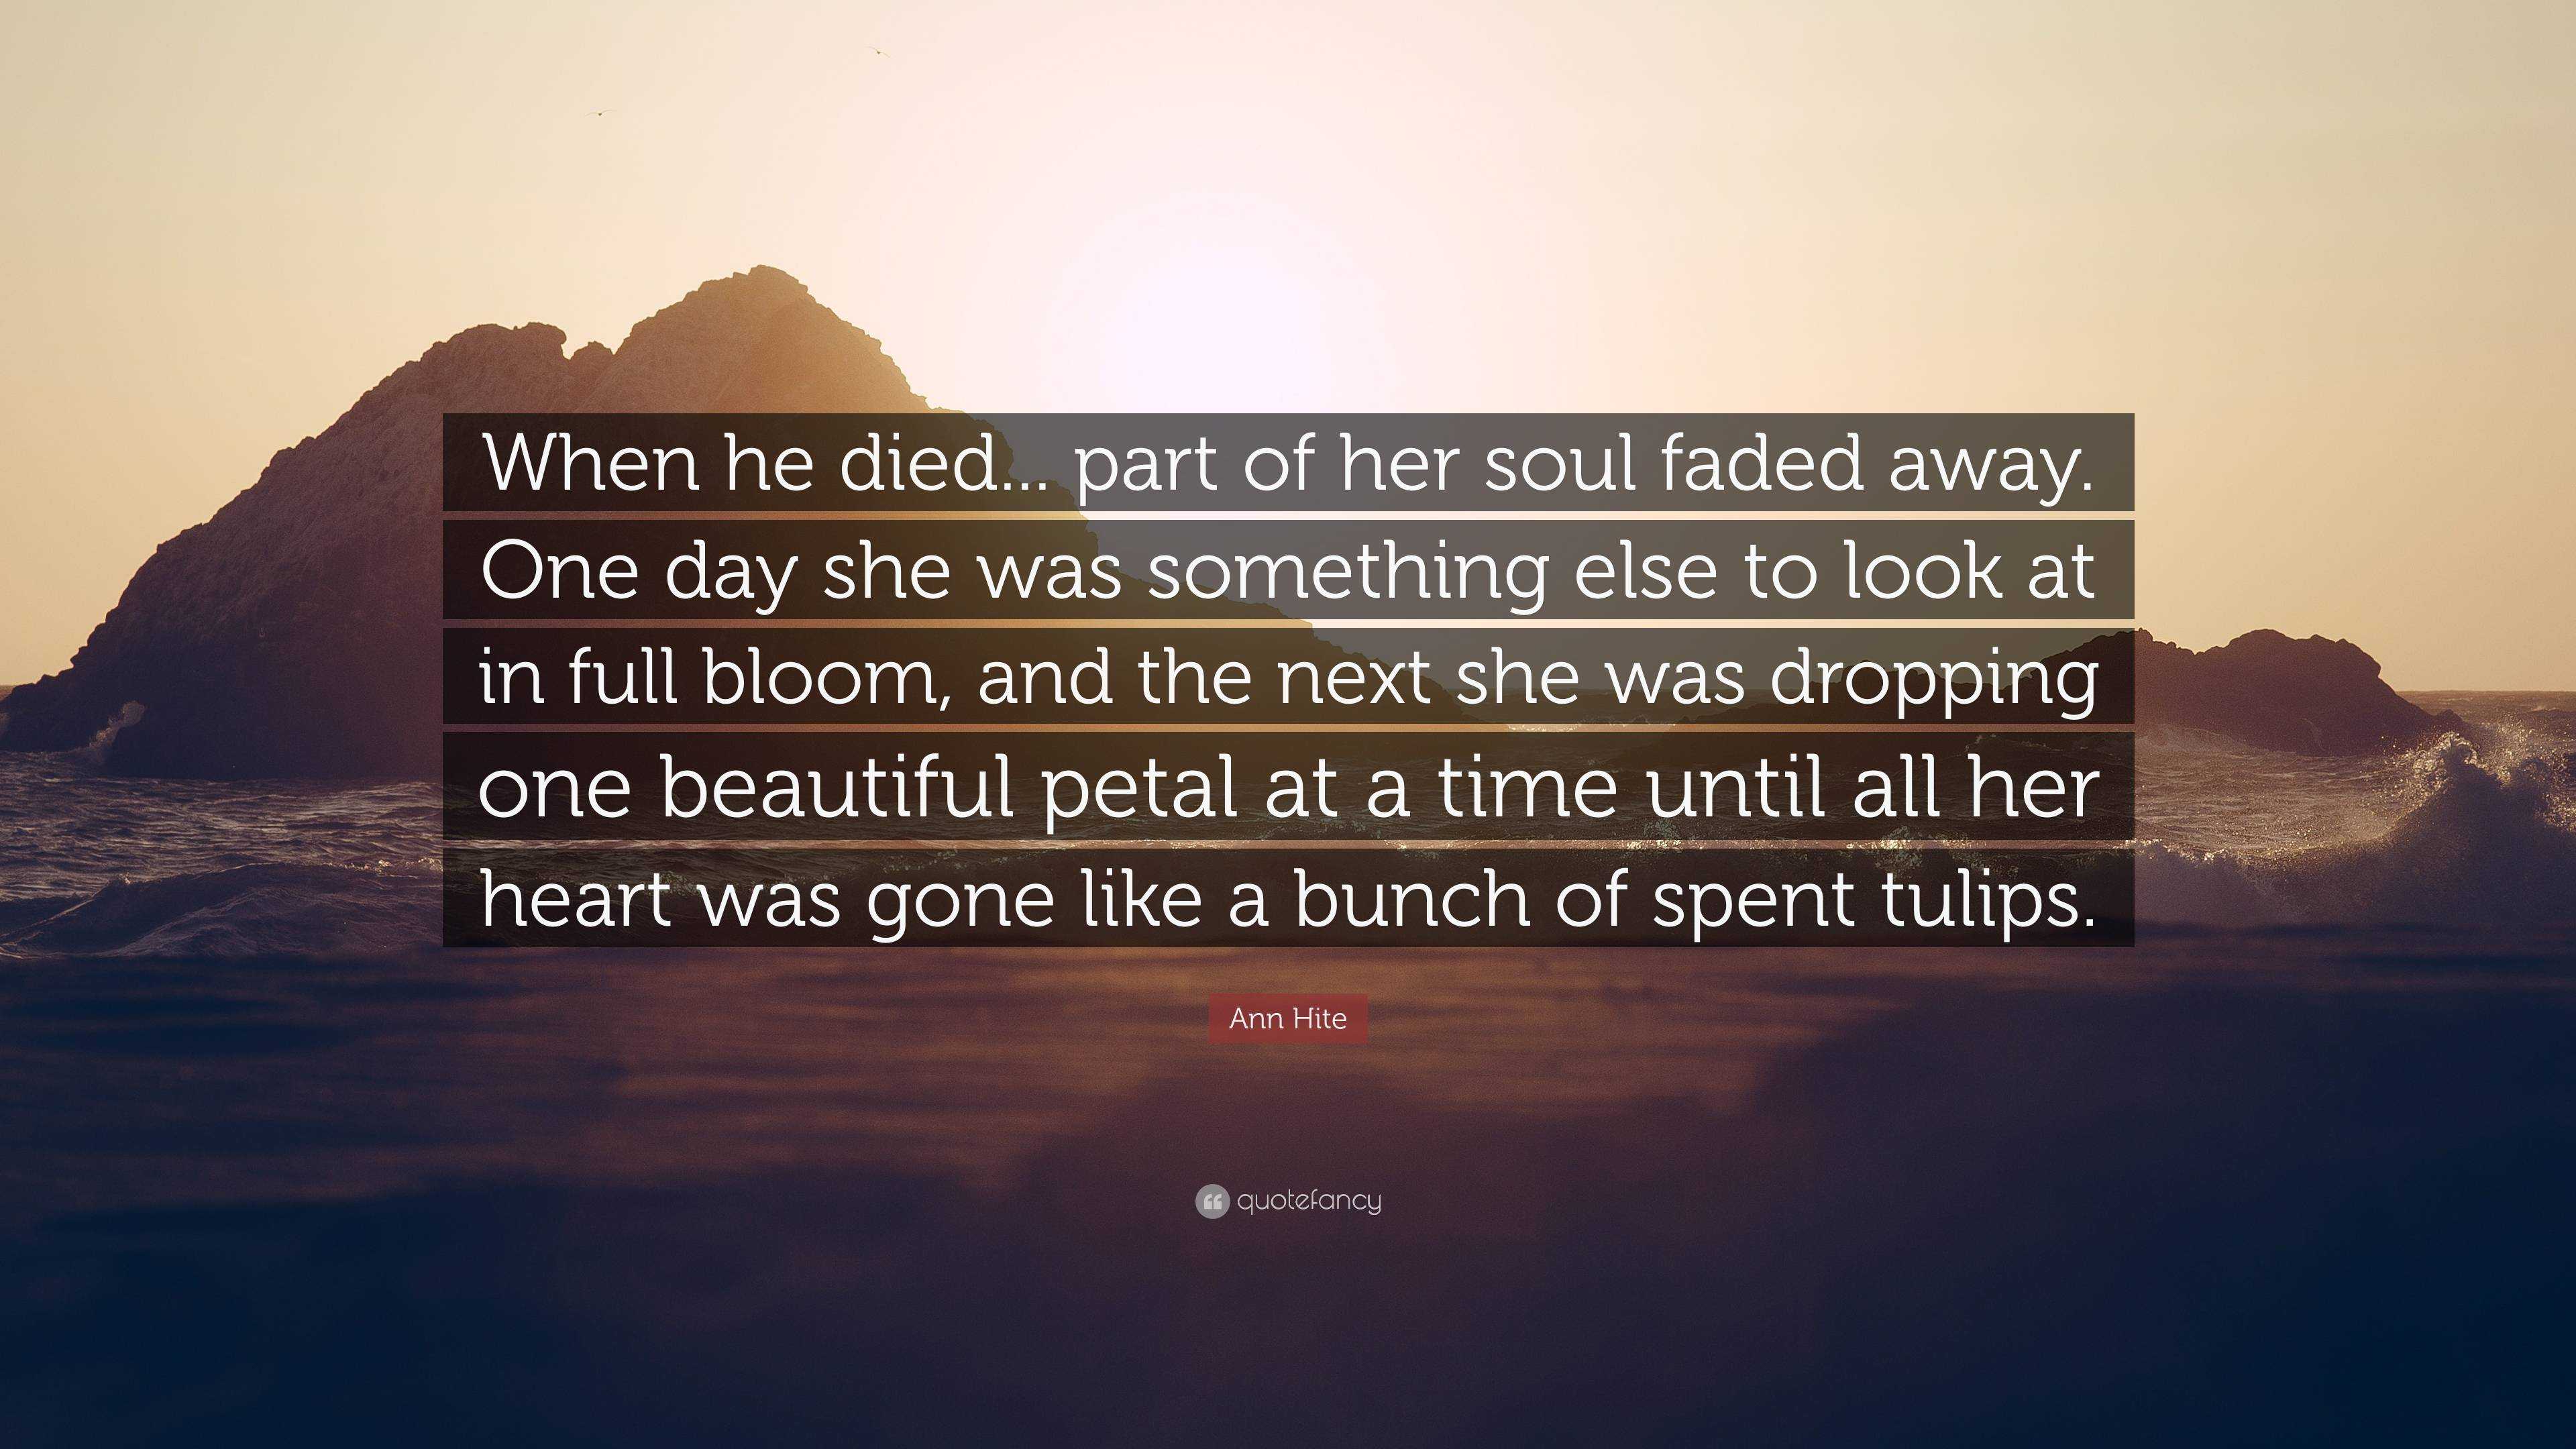 Ann Hite Quote When He Died Part Of Her Soul Faded Away One Day She Was Something Else To Look At In Full Bloom And The Next She W 2 Wallpapers Quotefancy